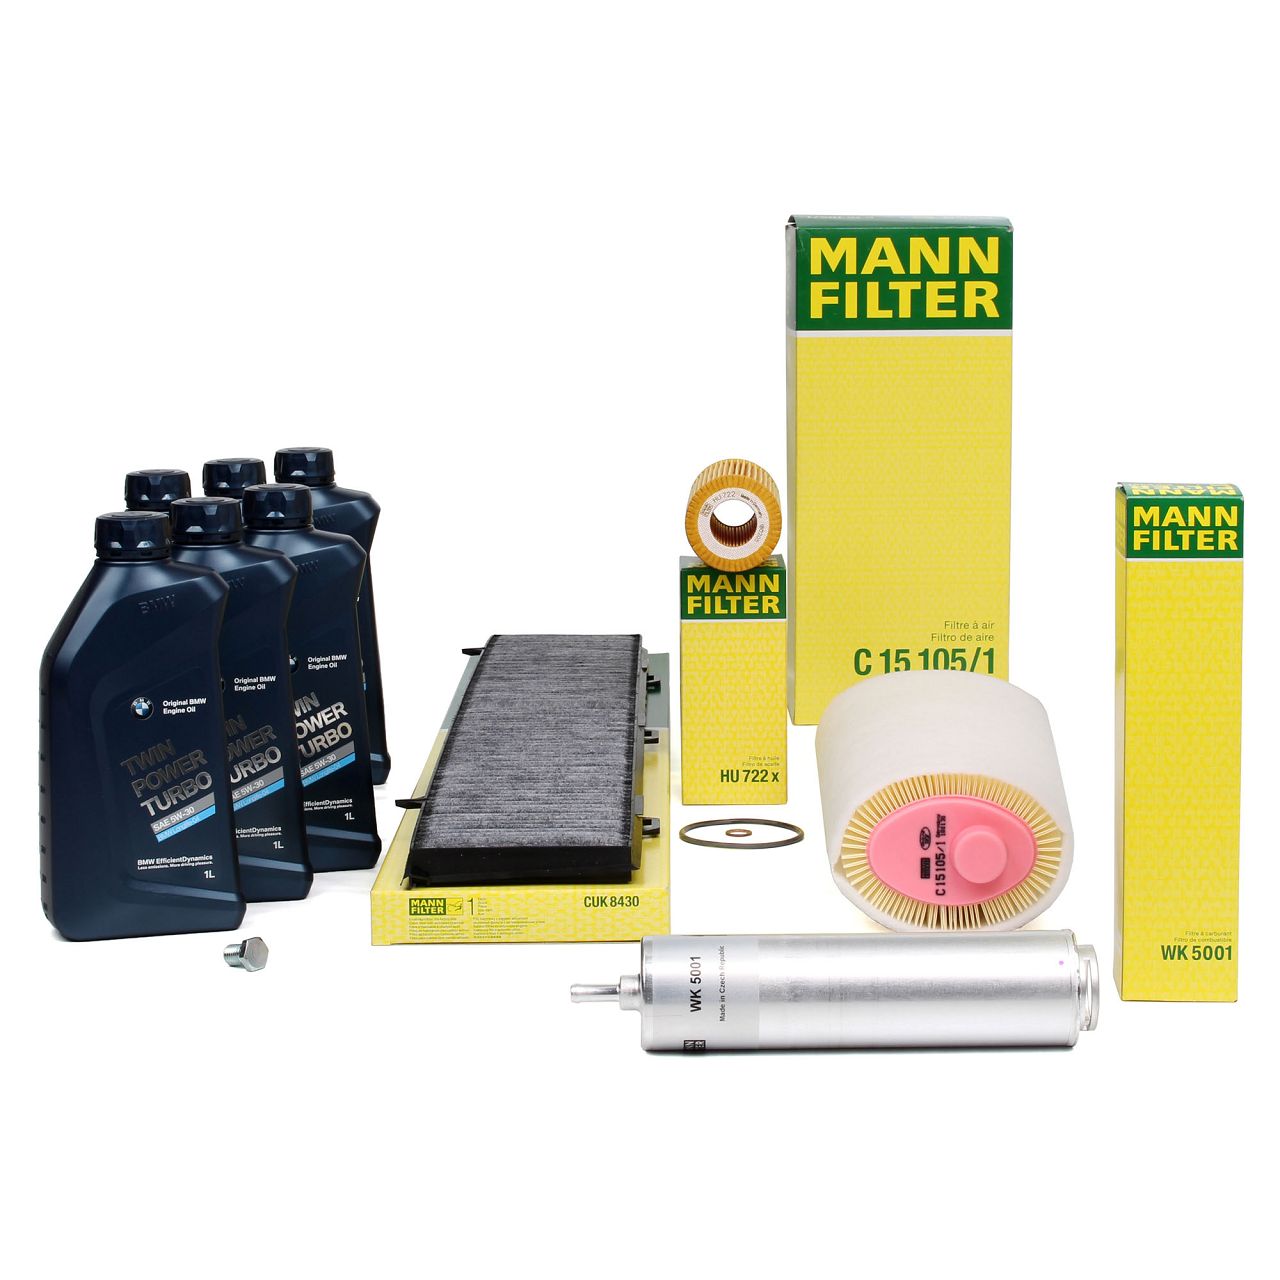 Inspection kit with filters and engine oil